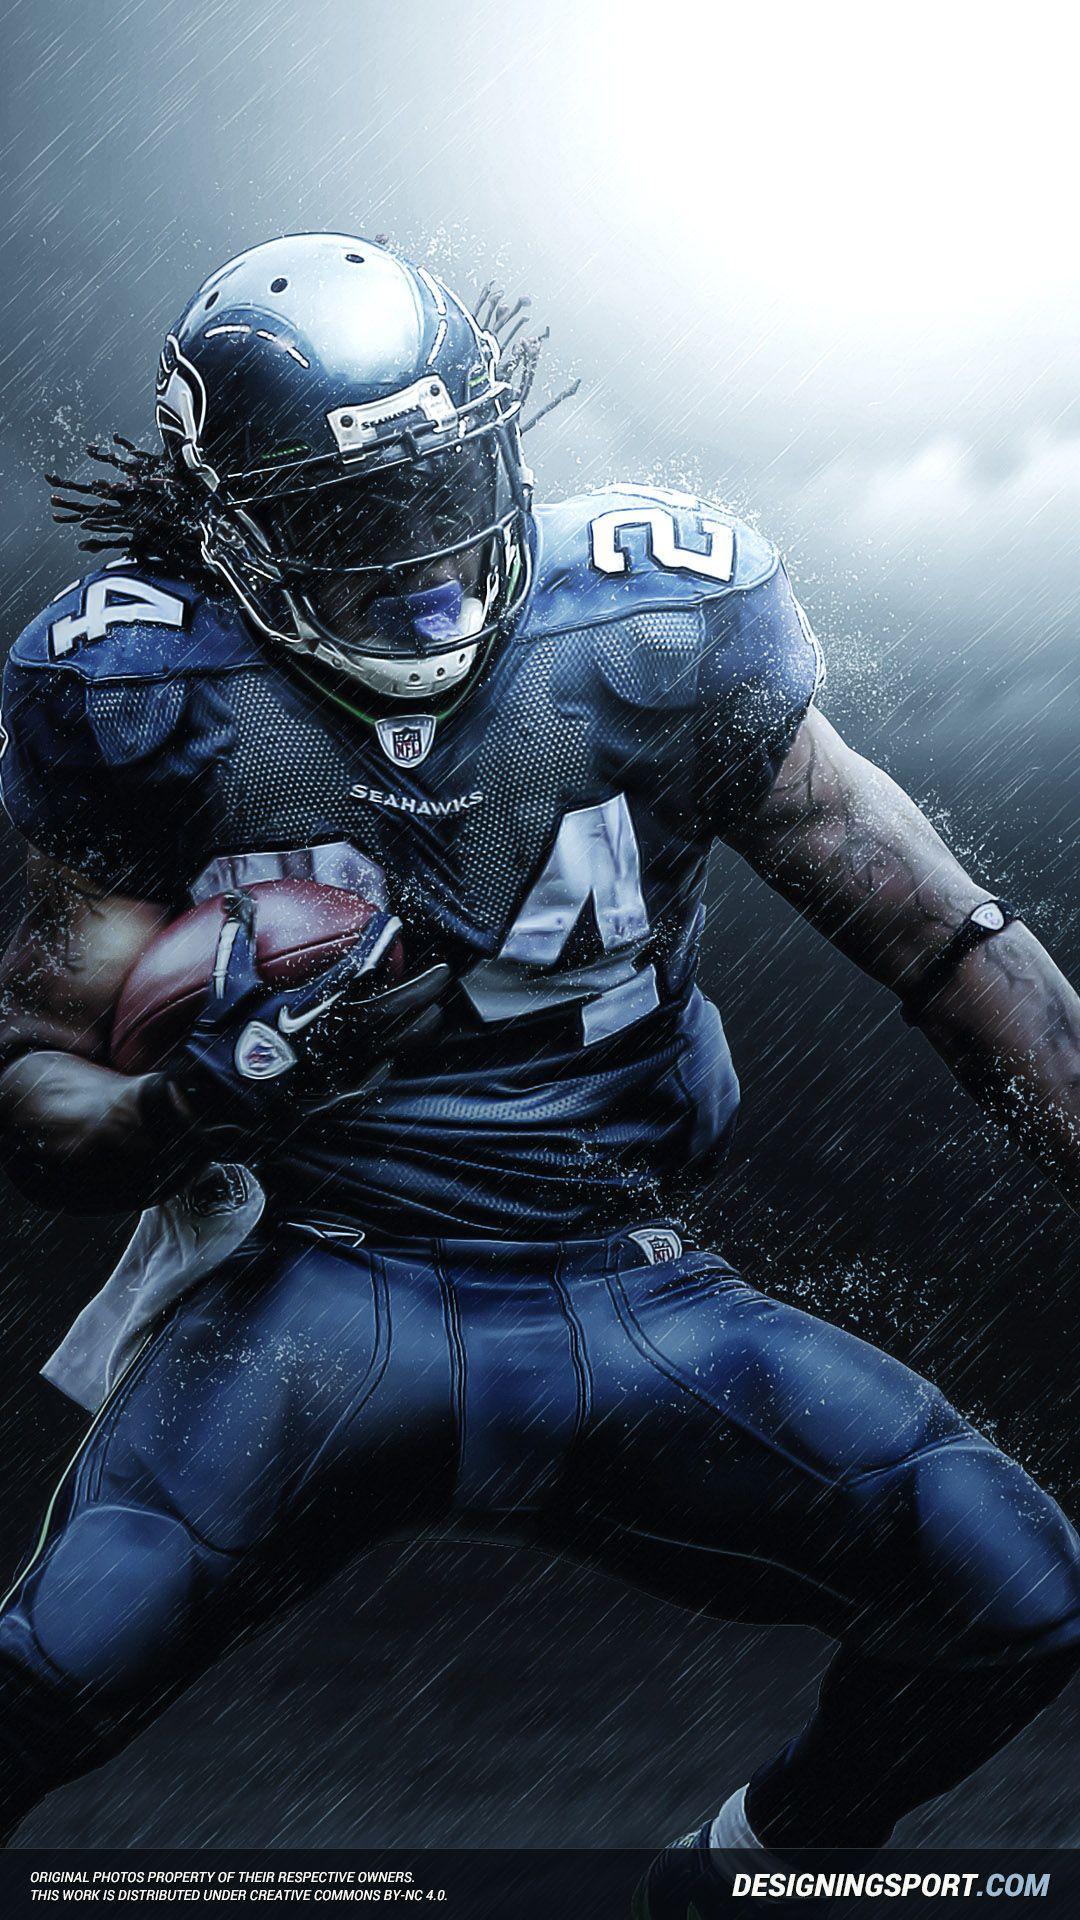 Best image about Marshawn Lynch. Beast mode